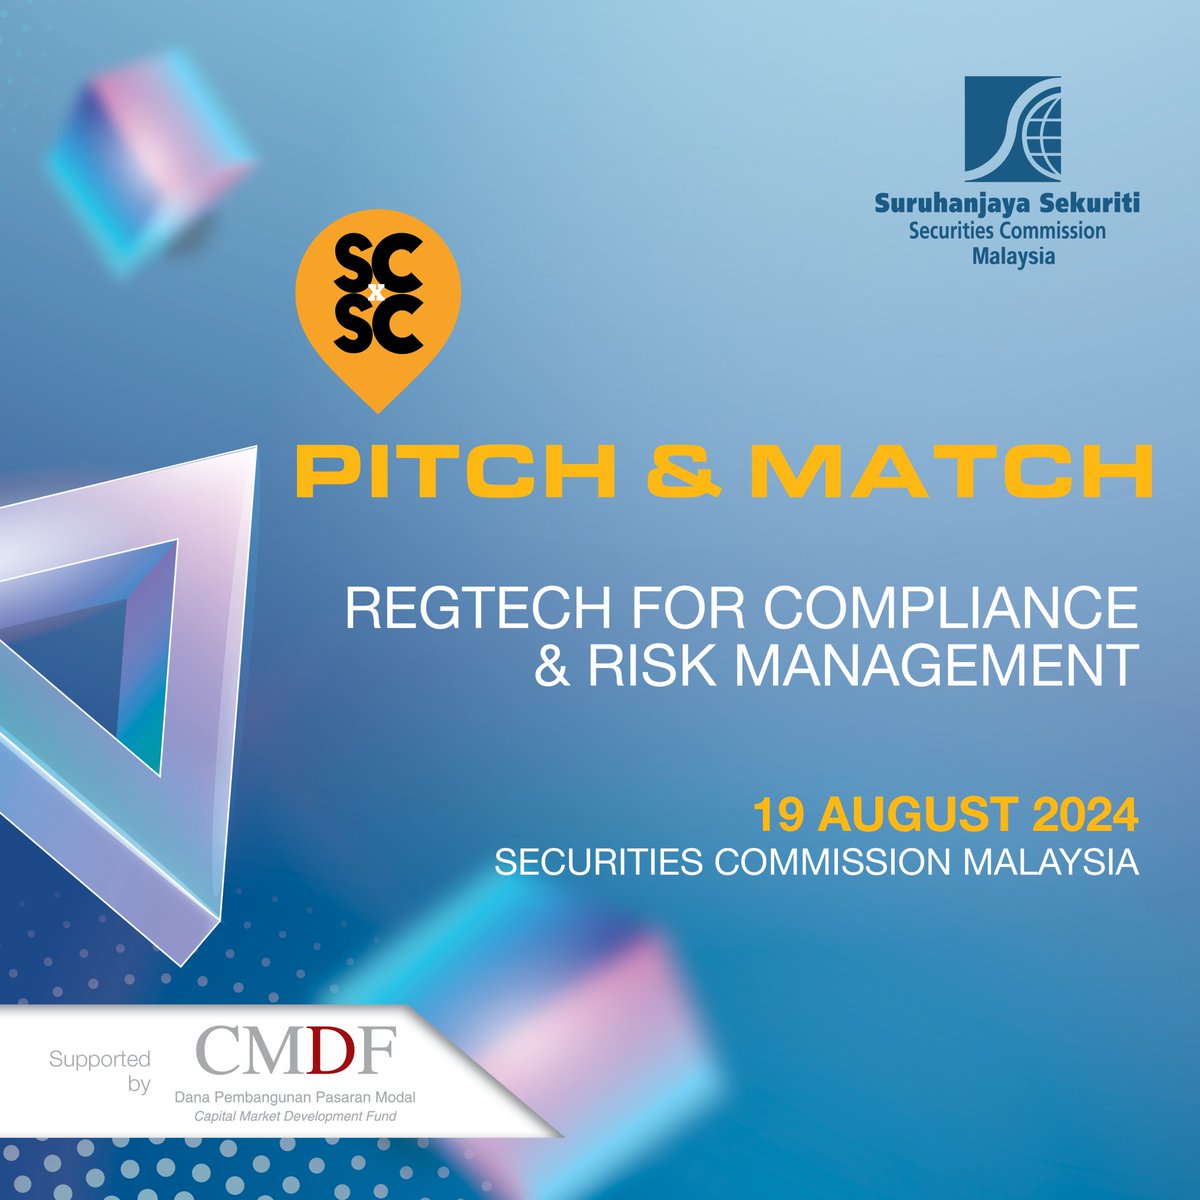 🚀 Attention all Regtech Solution Providers in Compliance & Risk Management for the Capital Market Sector!

Join us at SCxSC's Pitch & Match on 19 Aug 2024, to showcase your cutting-edge solutions to industry leaders eager to optimise processes and unlock data-driven insights.